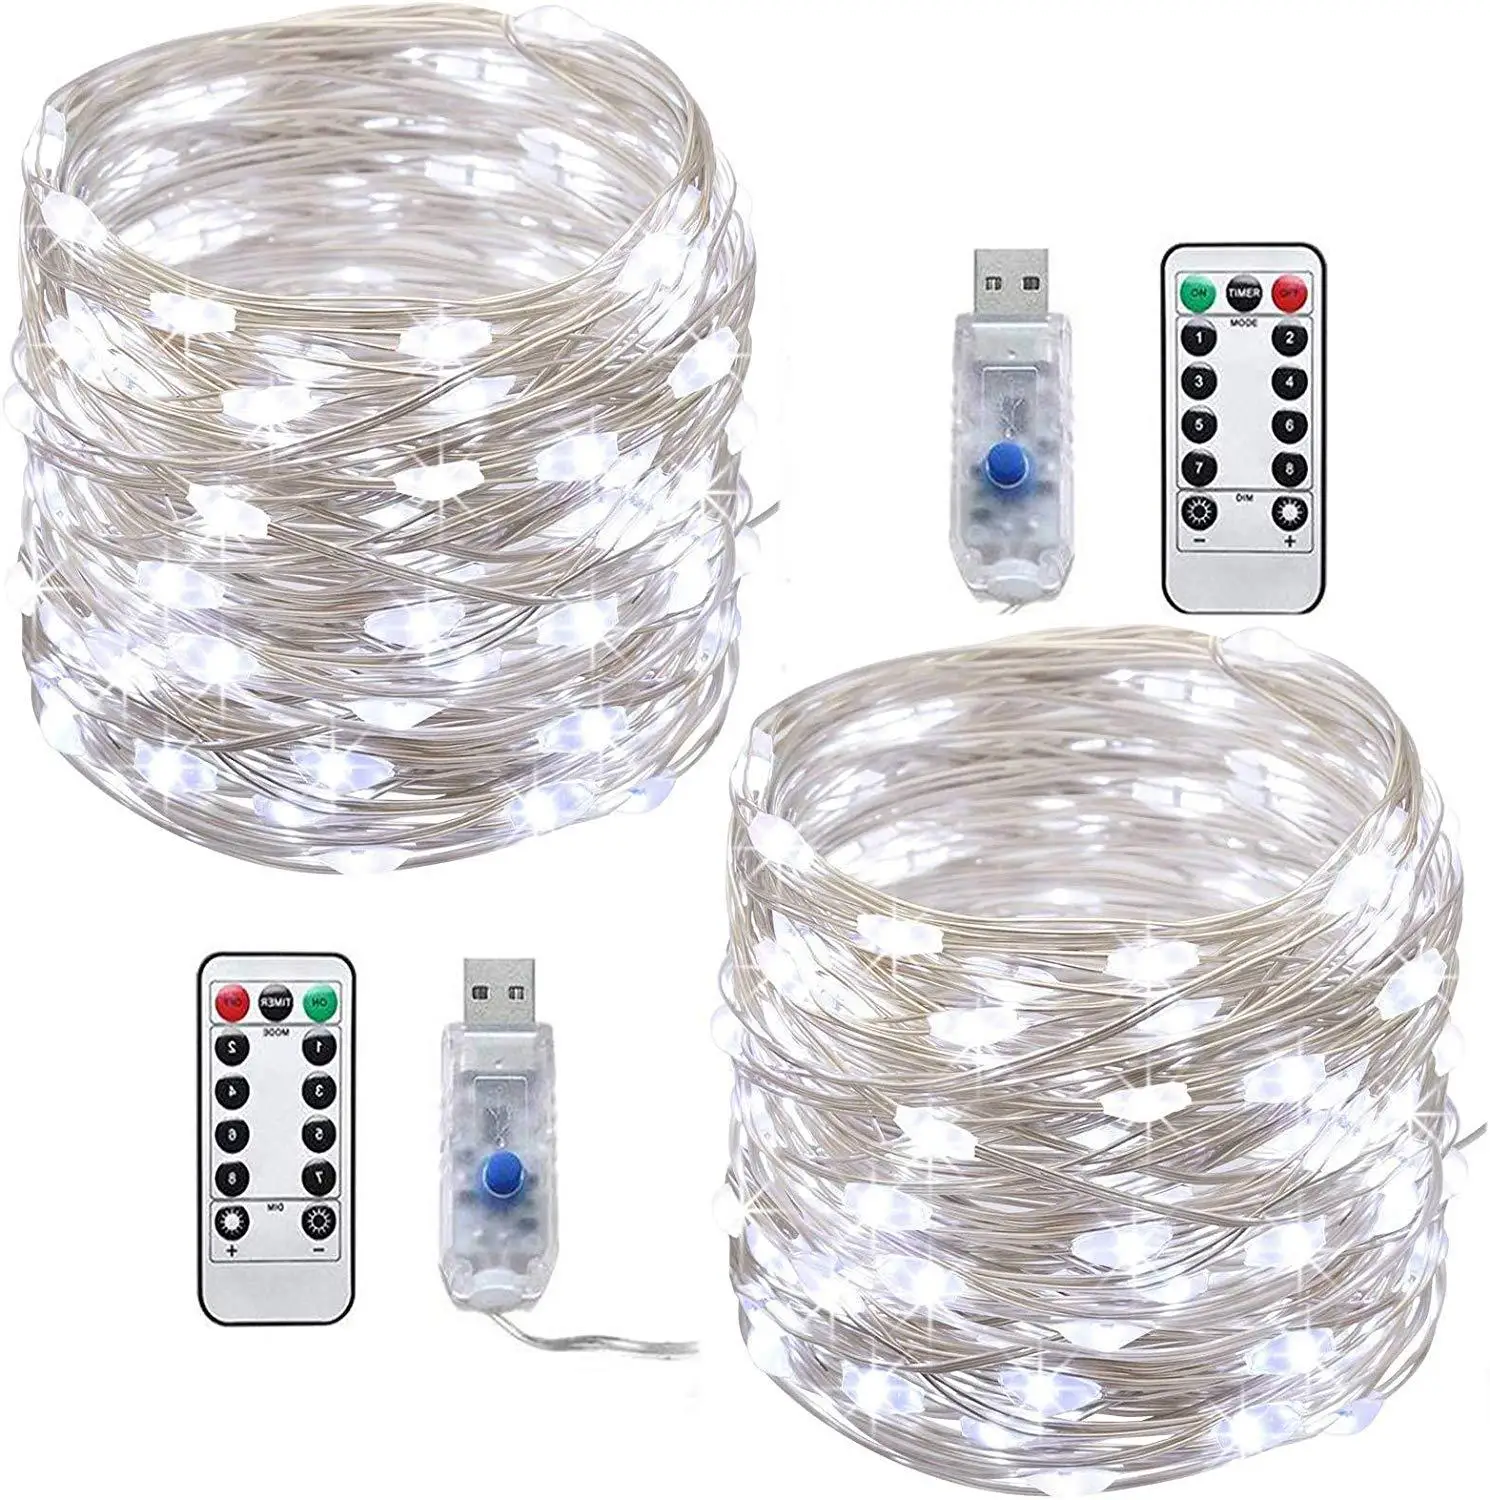 [2 Pack]5m 50 LEDs USB Micro Silver Wire Waterproof Fairy Lights Indoor Outdoor Starry String WITH REMOTE CONTROL